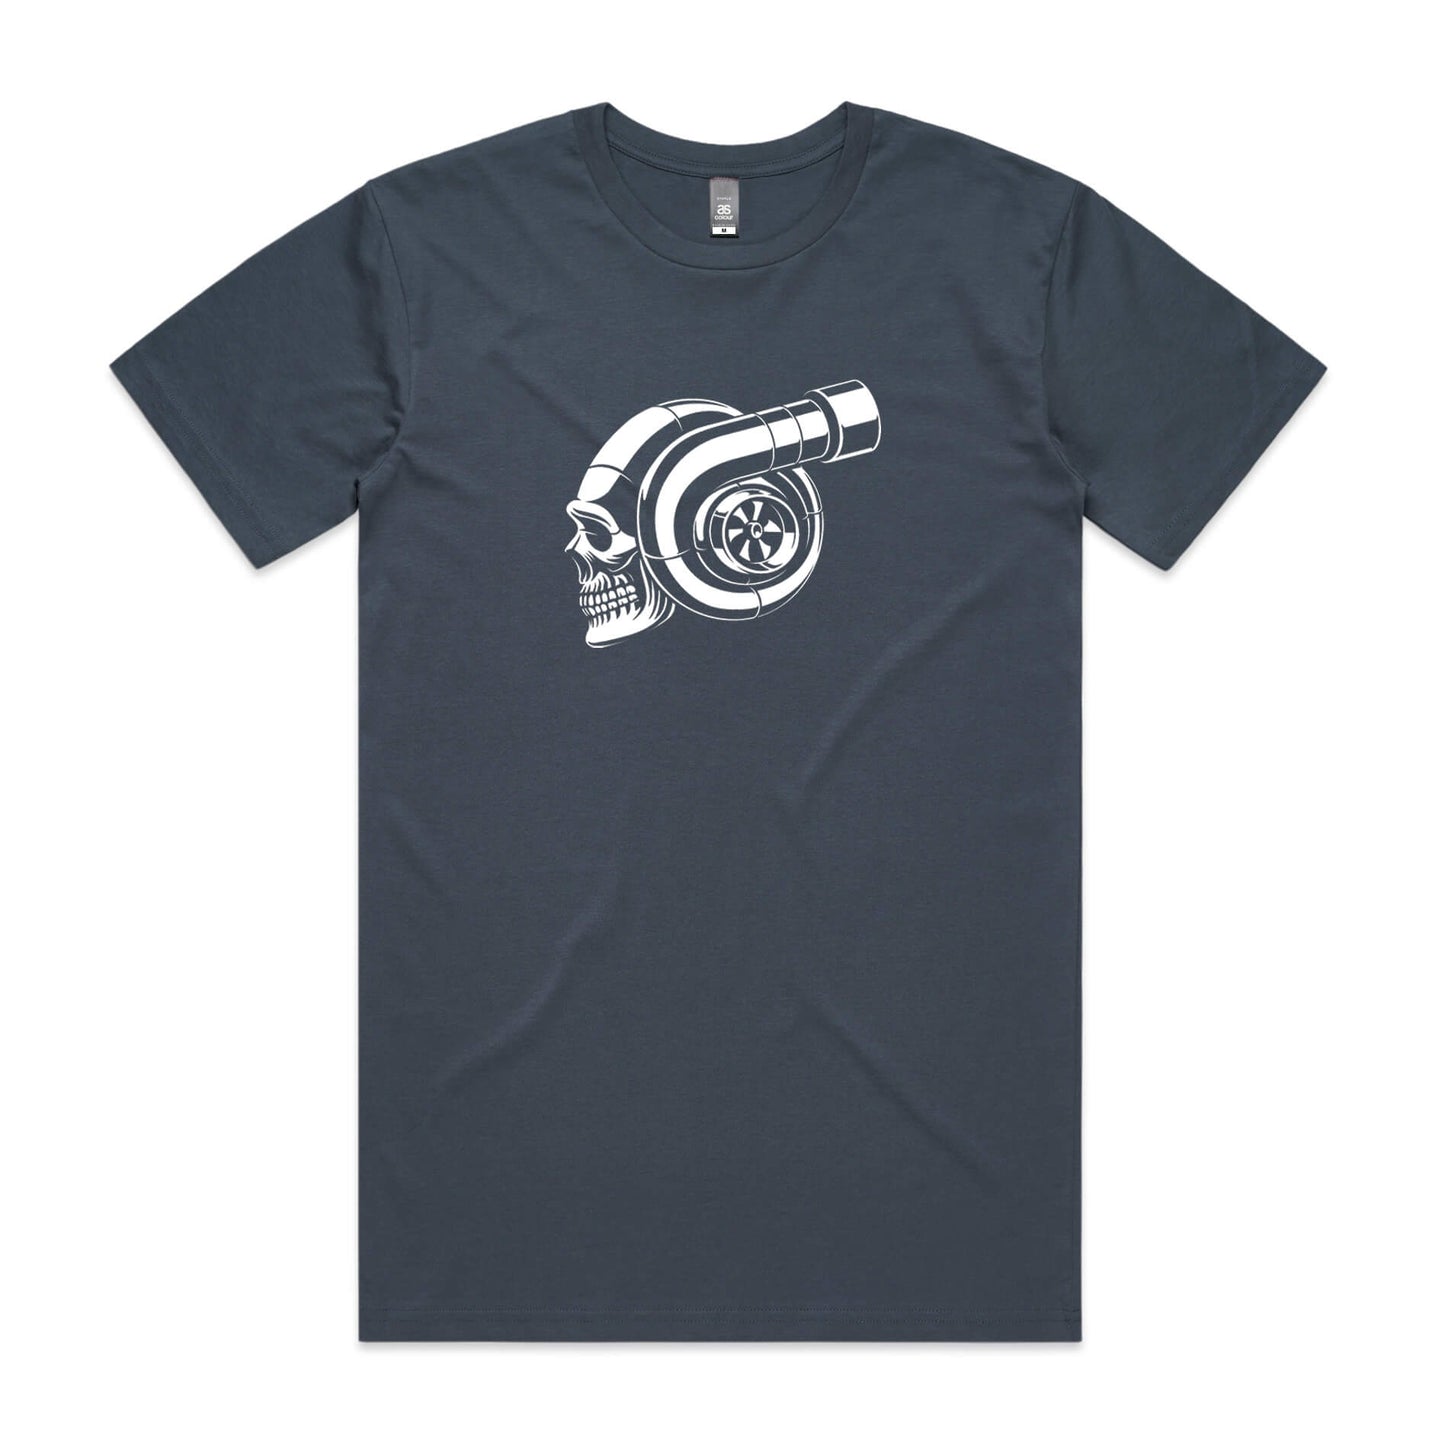 Boosted t-shirt in Petrol with a white graphic of a skull and turbocharger